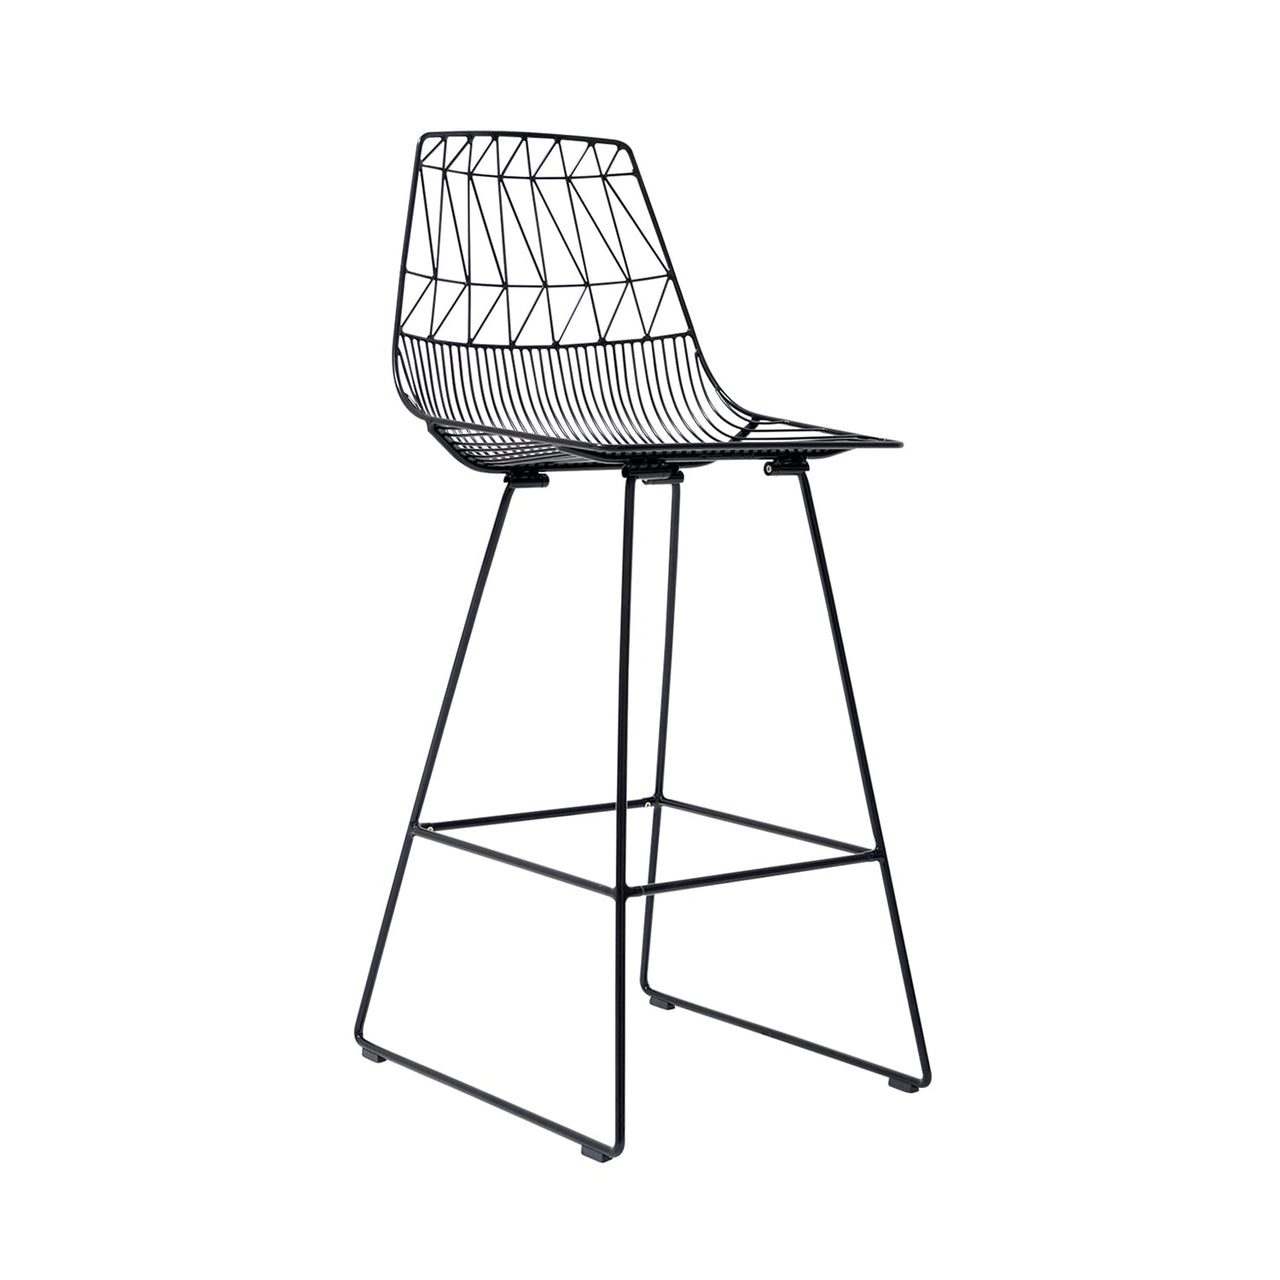 Lucy Bar Stool: Color + Black + Without Seat Pad